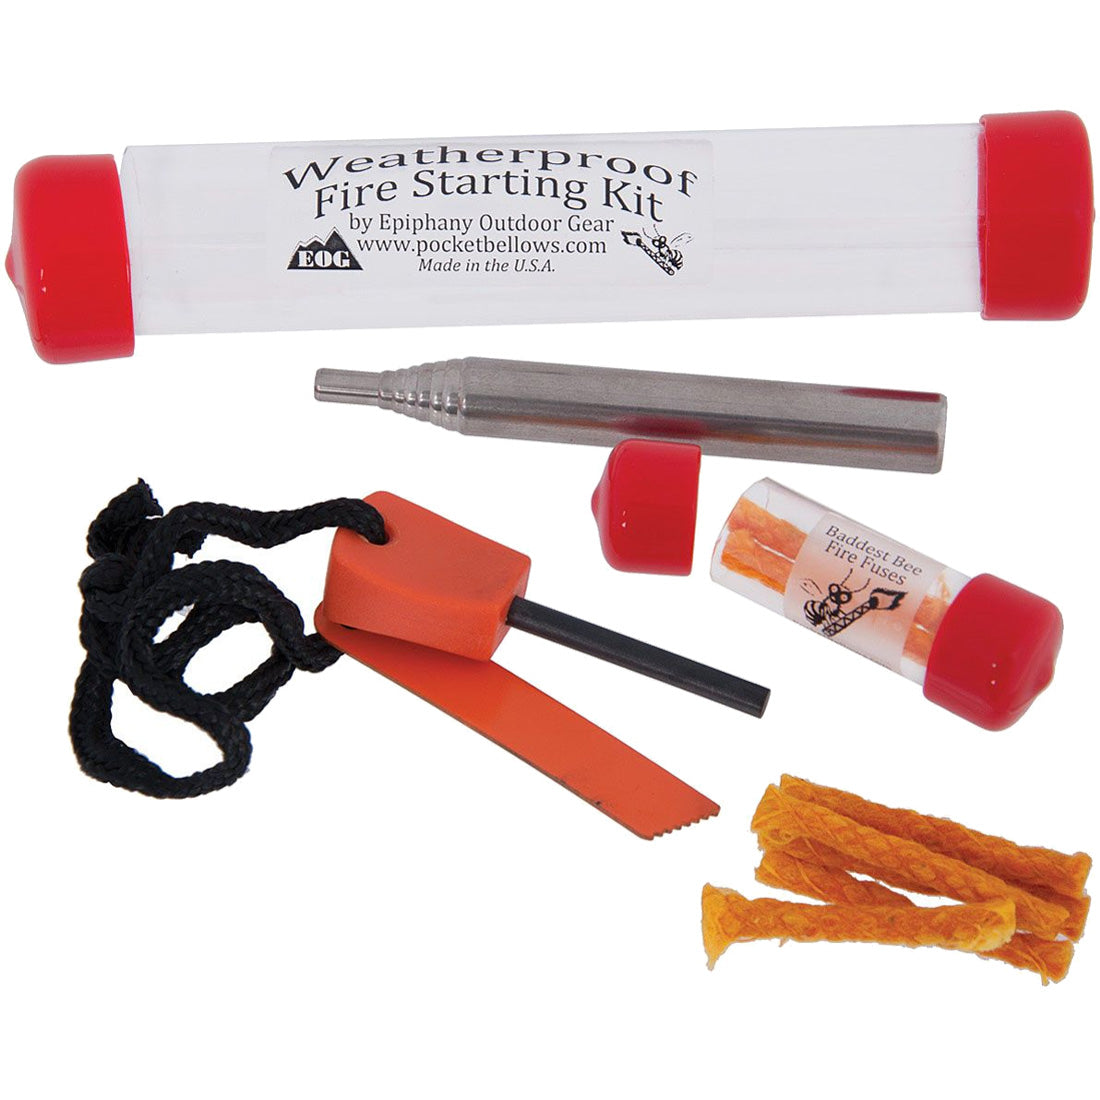 Epiphany Outdoor Gear Bellows-Based Fire Starting Kit